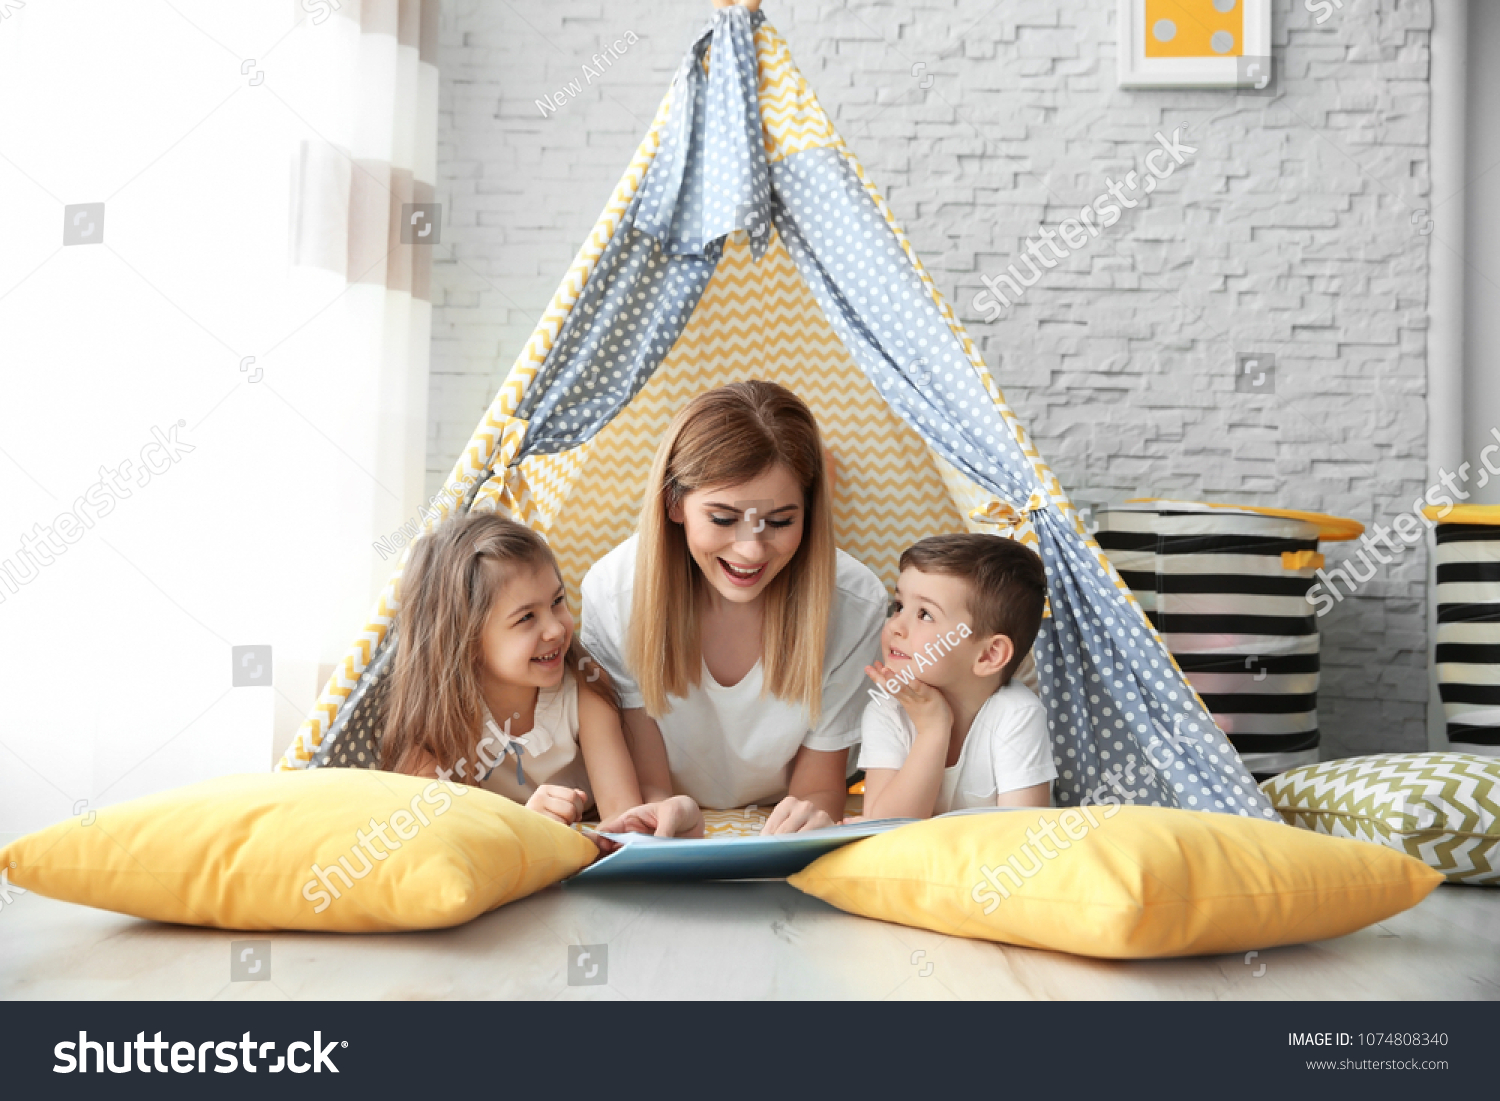 Nanny and little children reading book in tent at home #1074808340